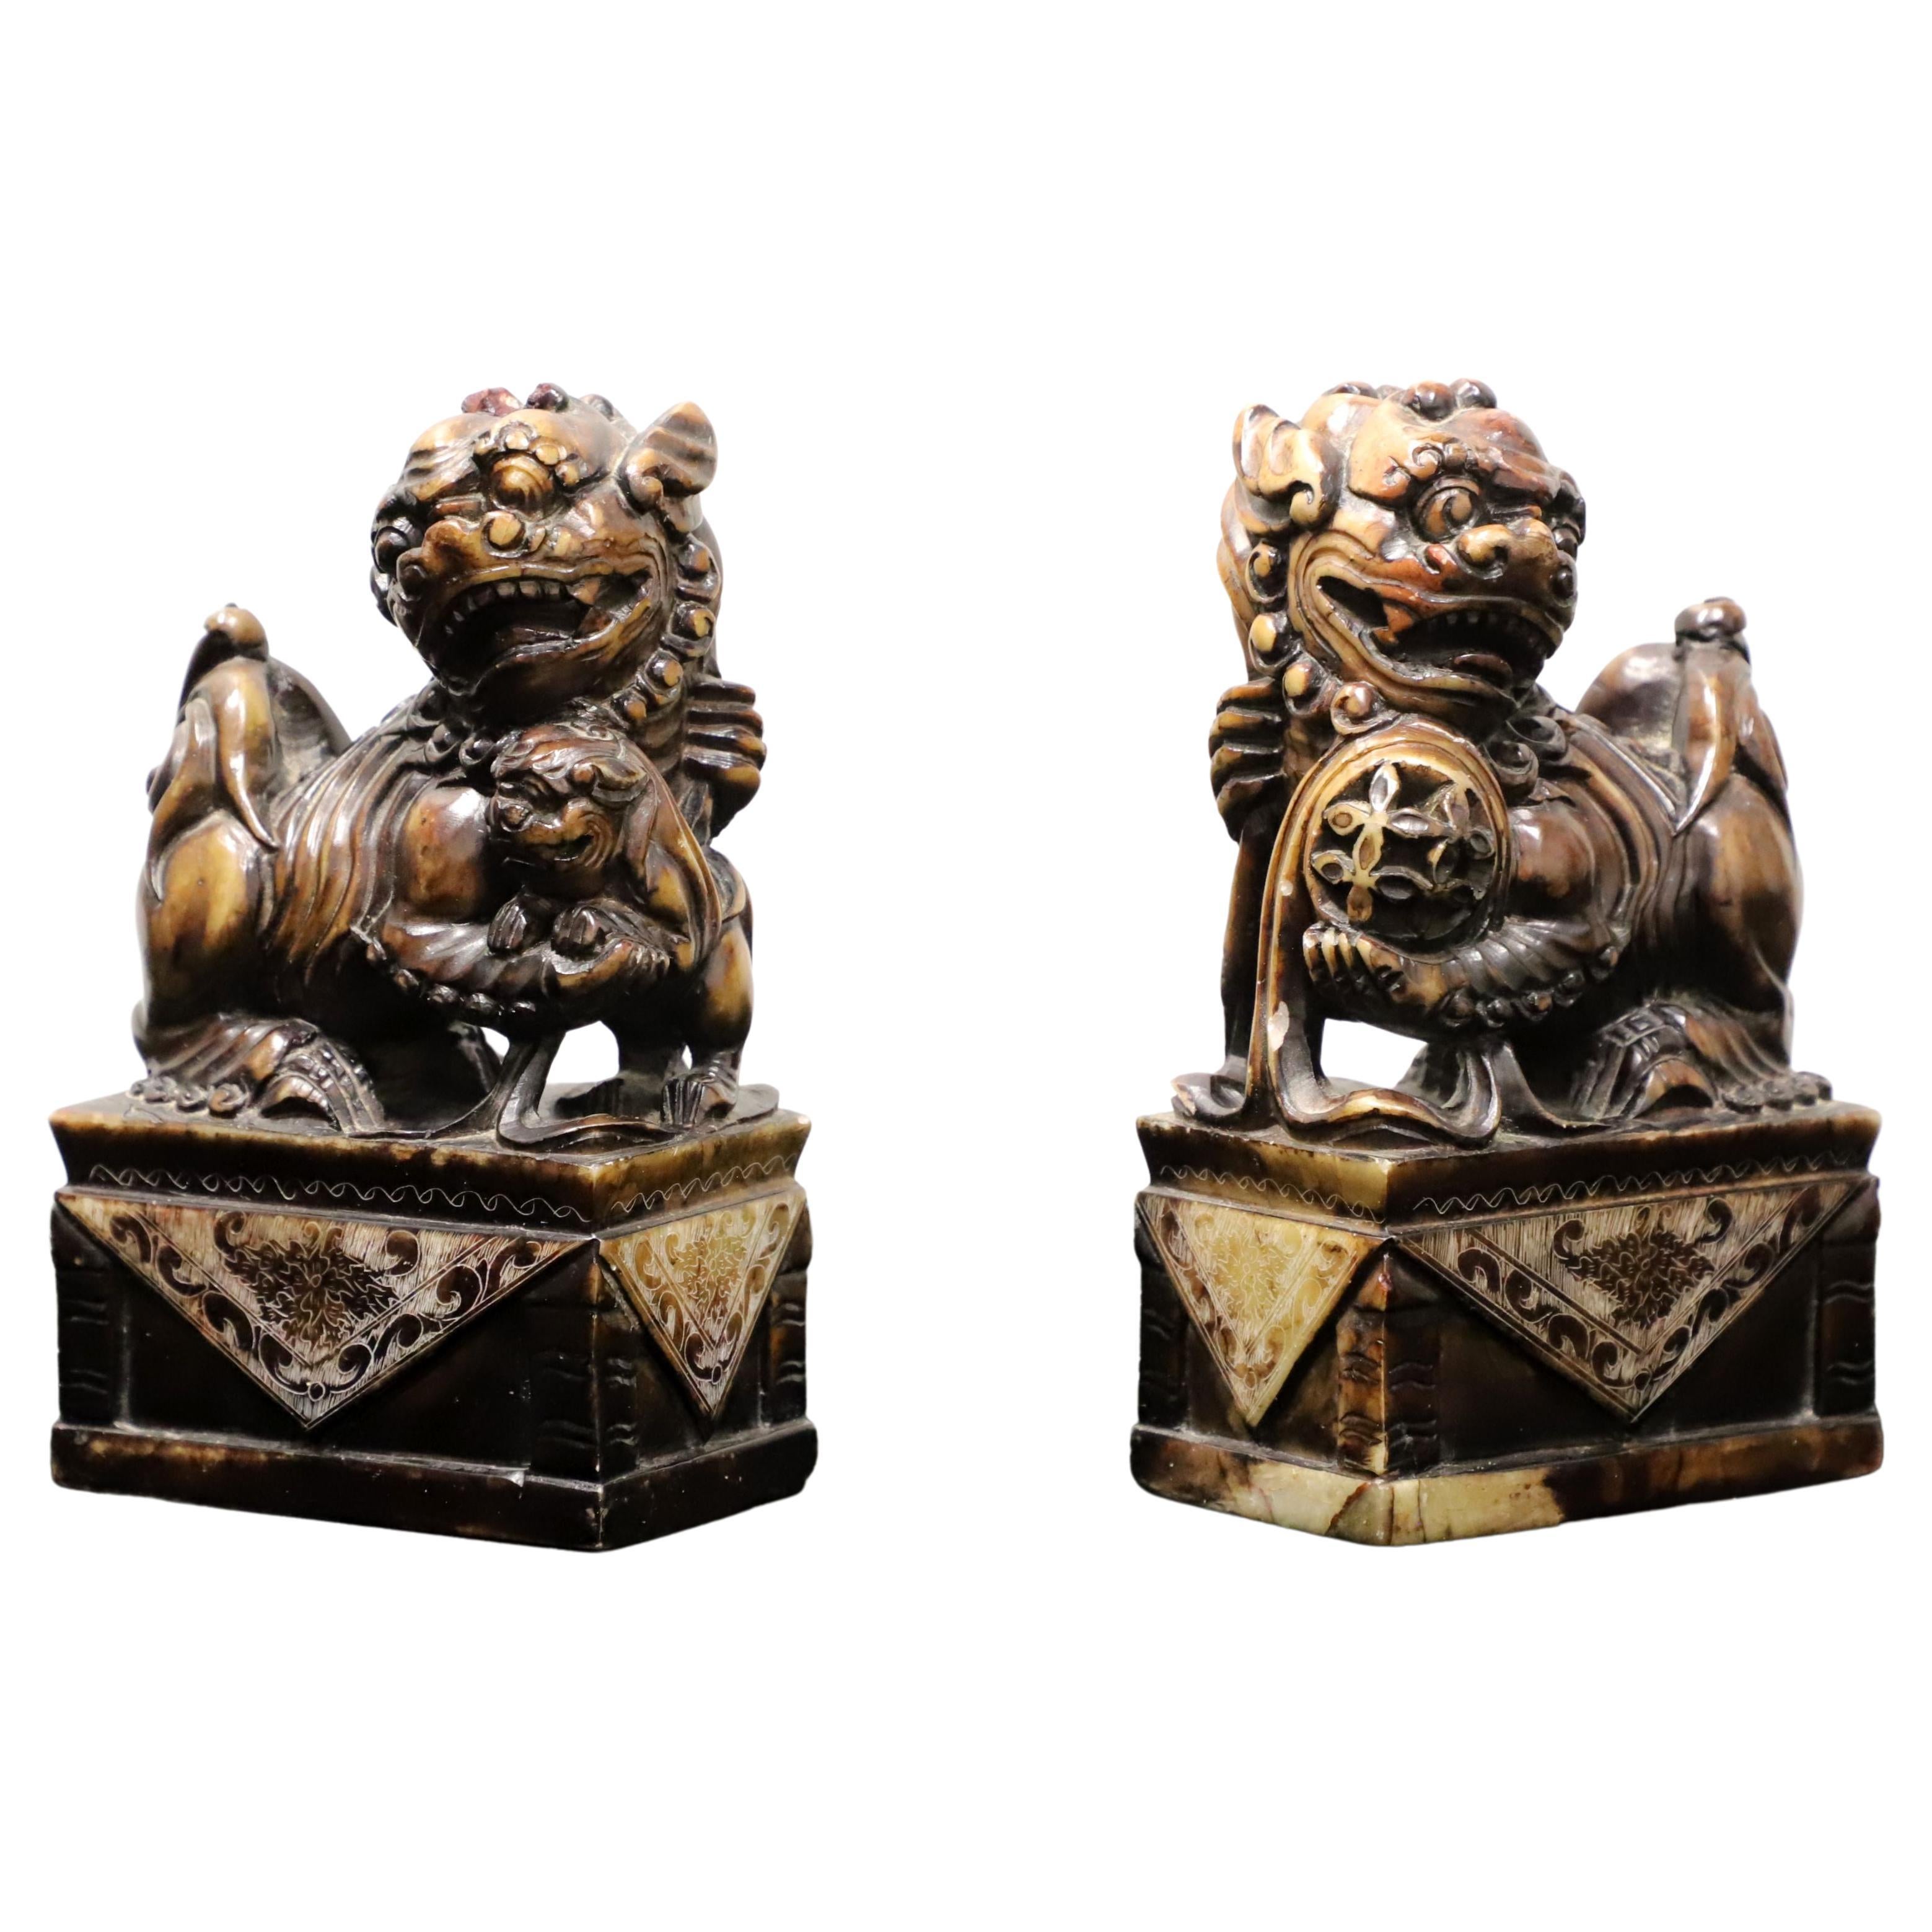 Mid 20th Century Carved Soapstone Sculptures Chocolate Colored Foo Dogs - Pair For Sale